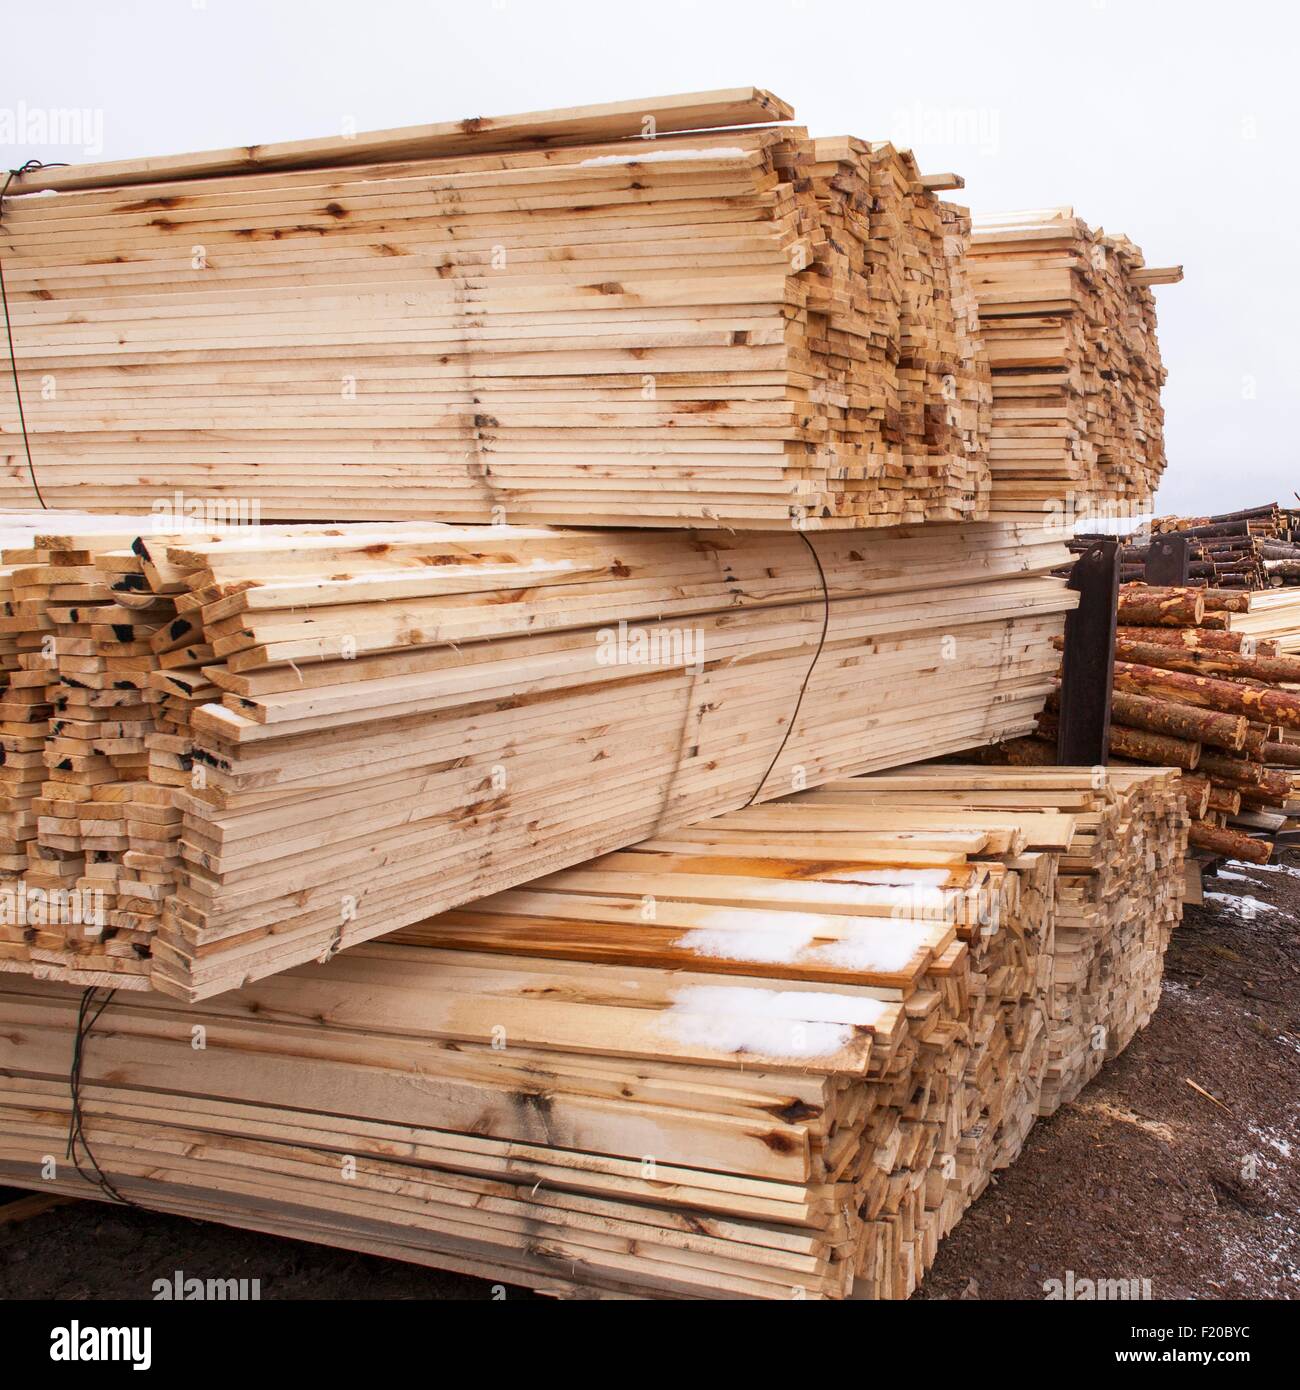 Stacks of timber and tree trunks in timber yard Stock Photo